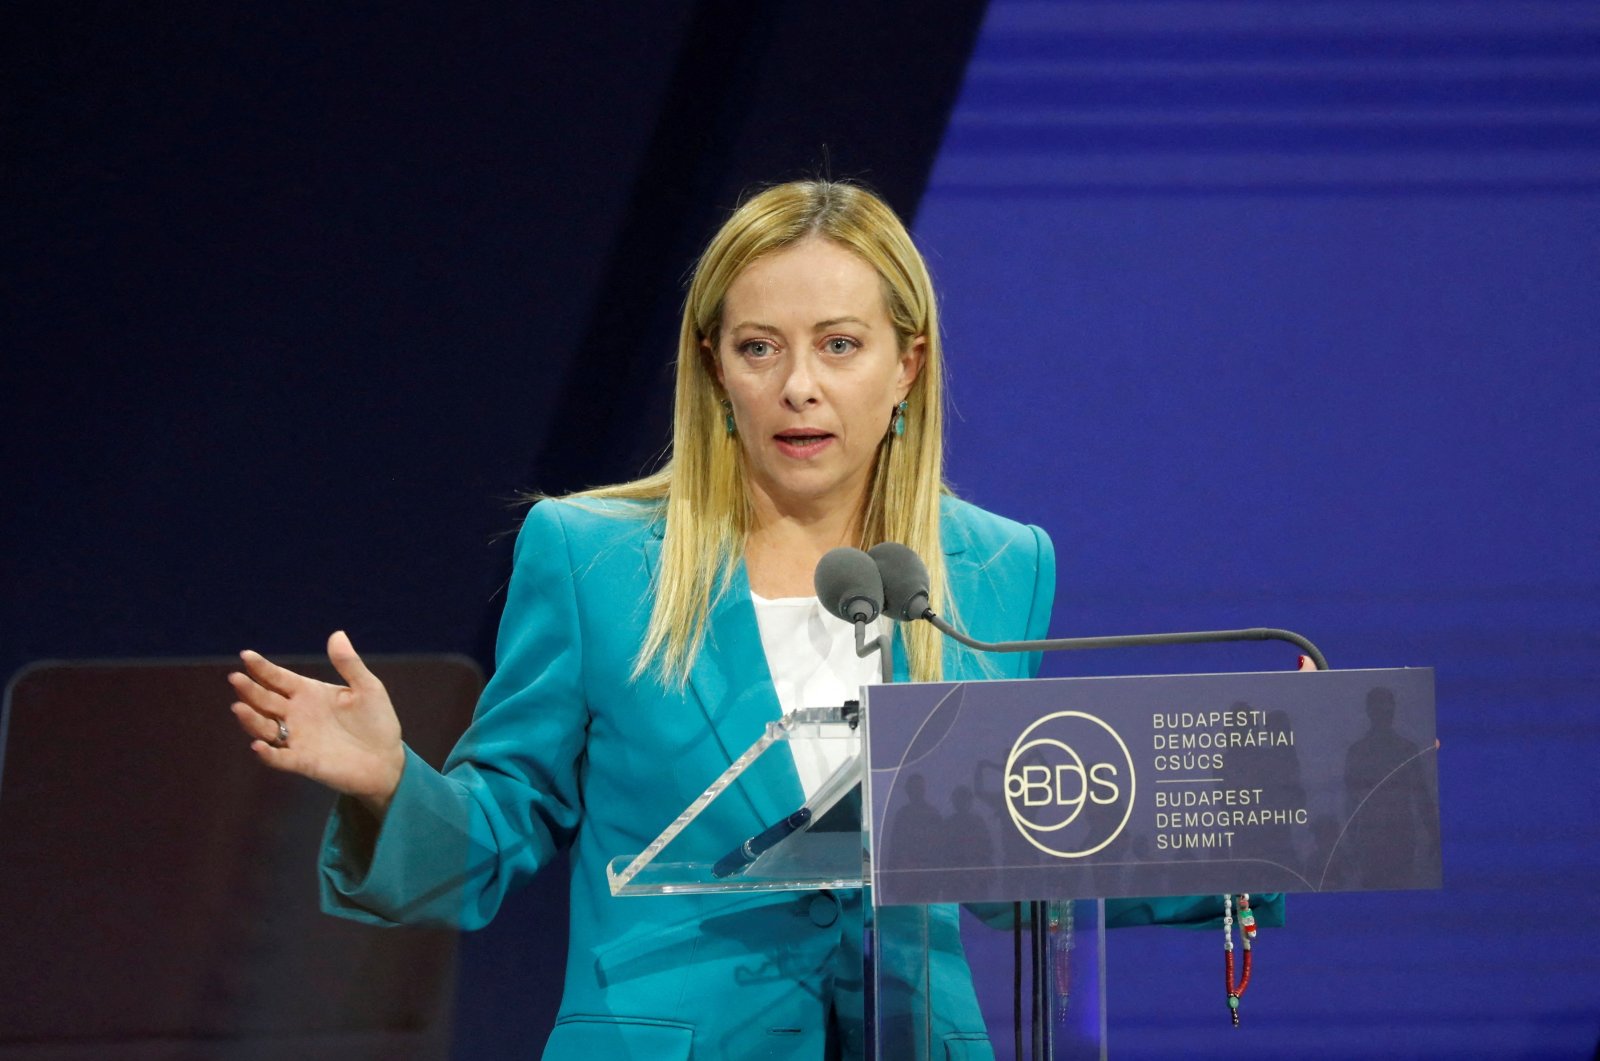 Italian Prime Minister Giorgia Meloni speaks during the Budapest Demographic Summit in Budapest, Hungary, Sept. 14, 2023. (Reuters Photo)